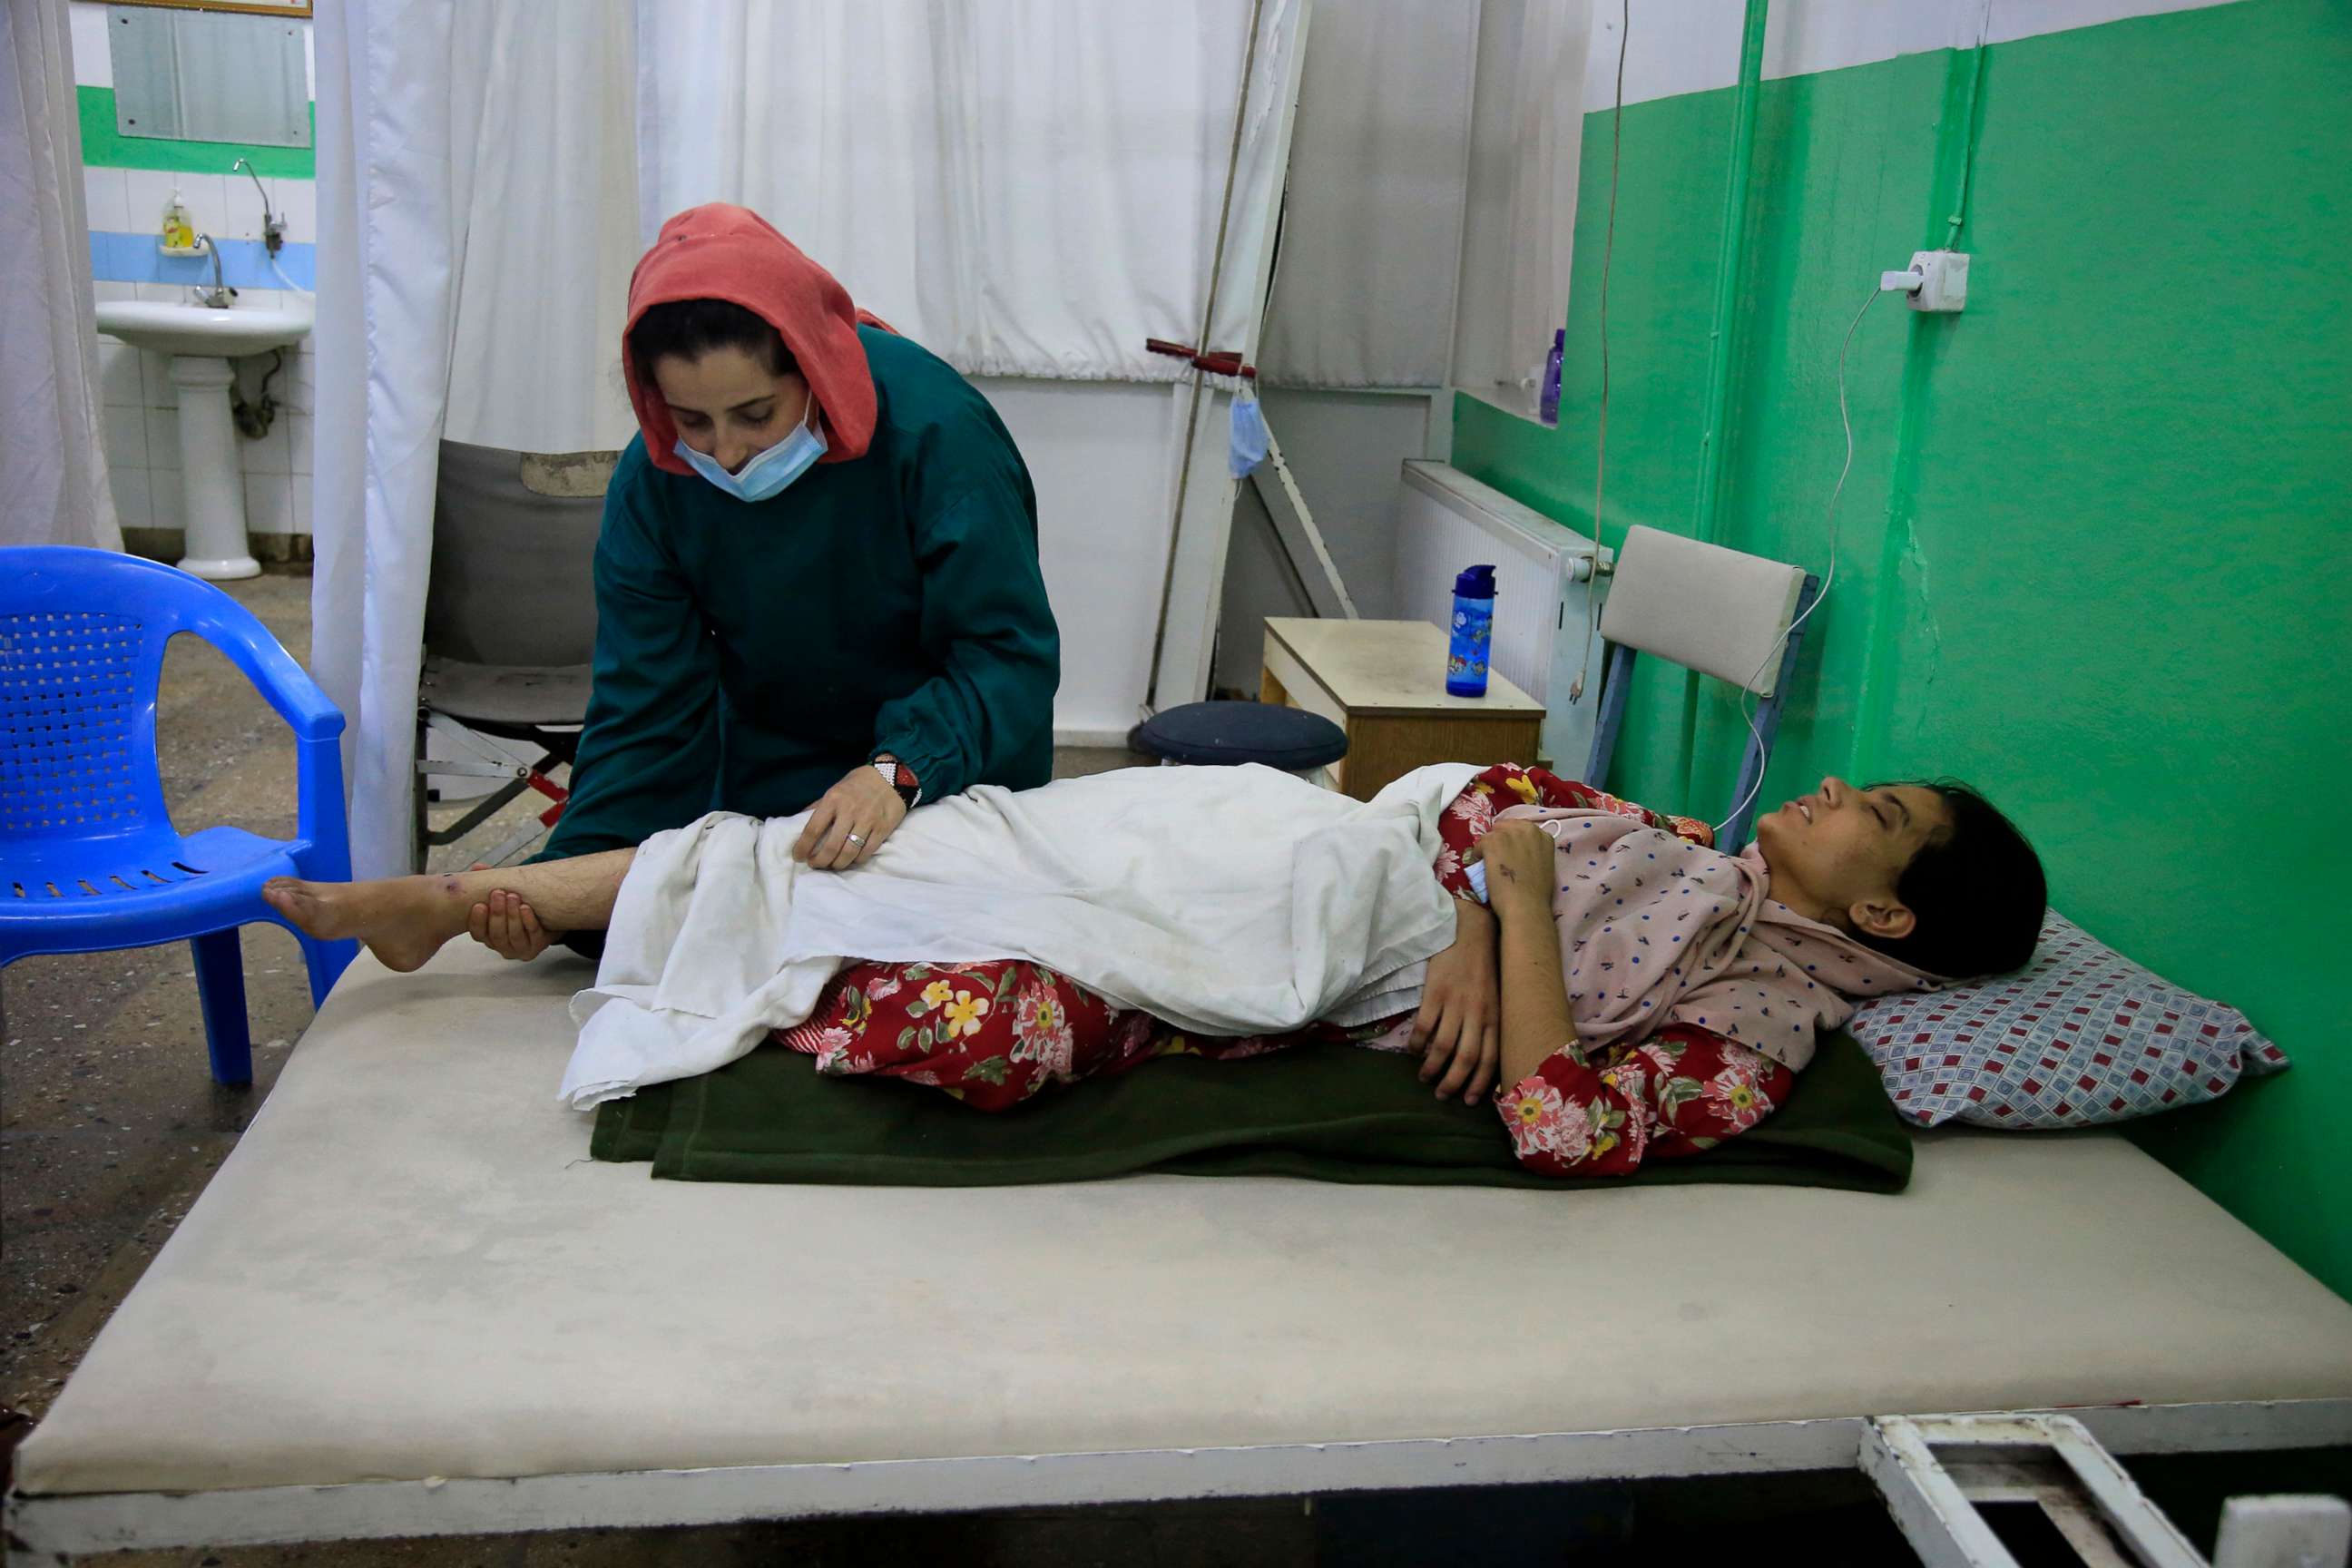 PHOTO: A girl receives medical care at the International Committee of the Red Cross (ICRC) physical rehabilitation center after being injured in fighting between the Taliban and Afghan security personnel, in Kabul, Afghanistan, Aug. 10, 2021